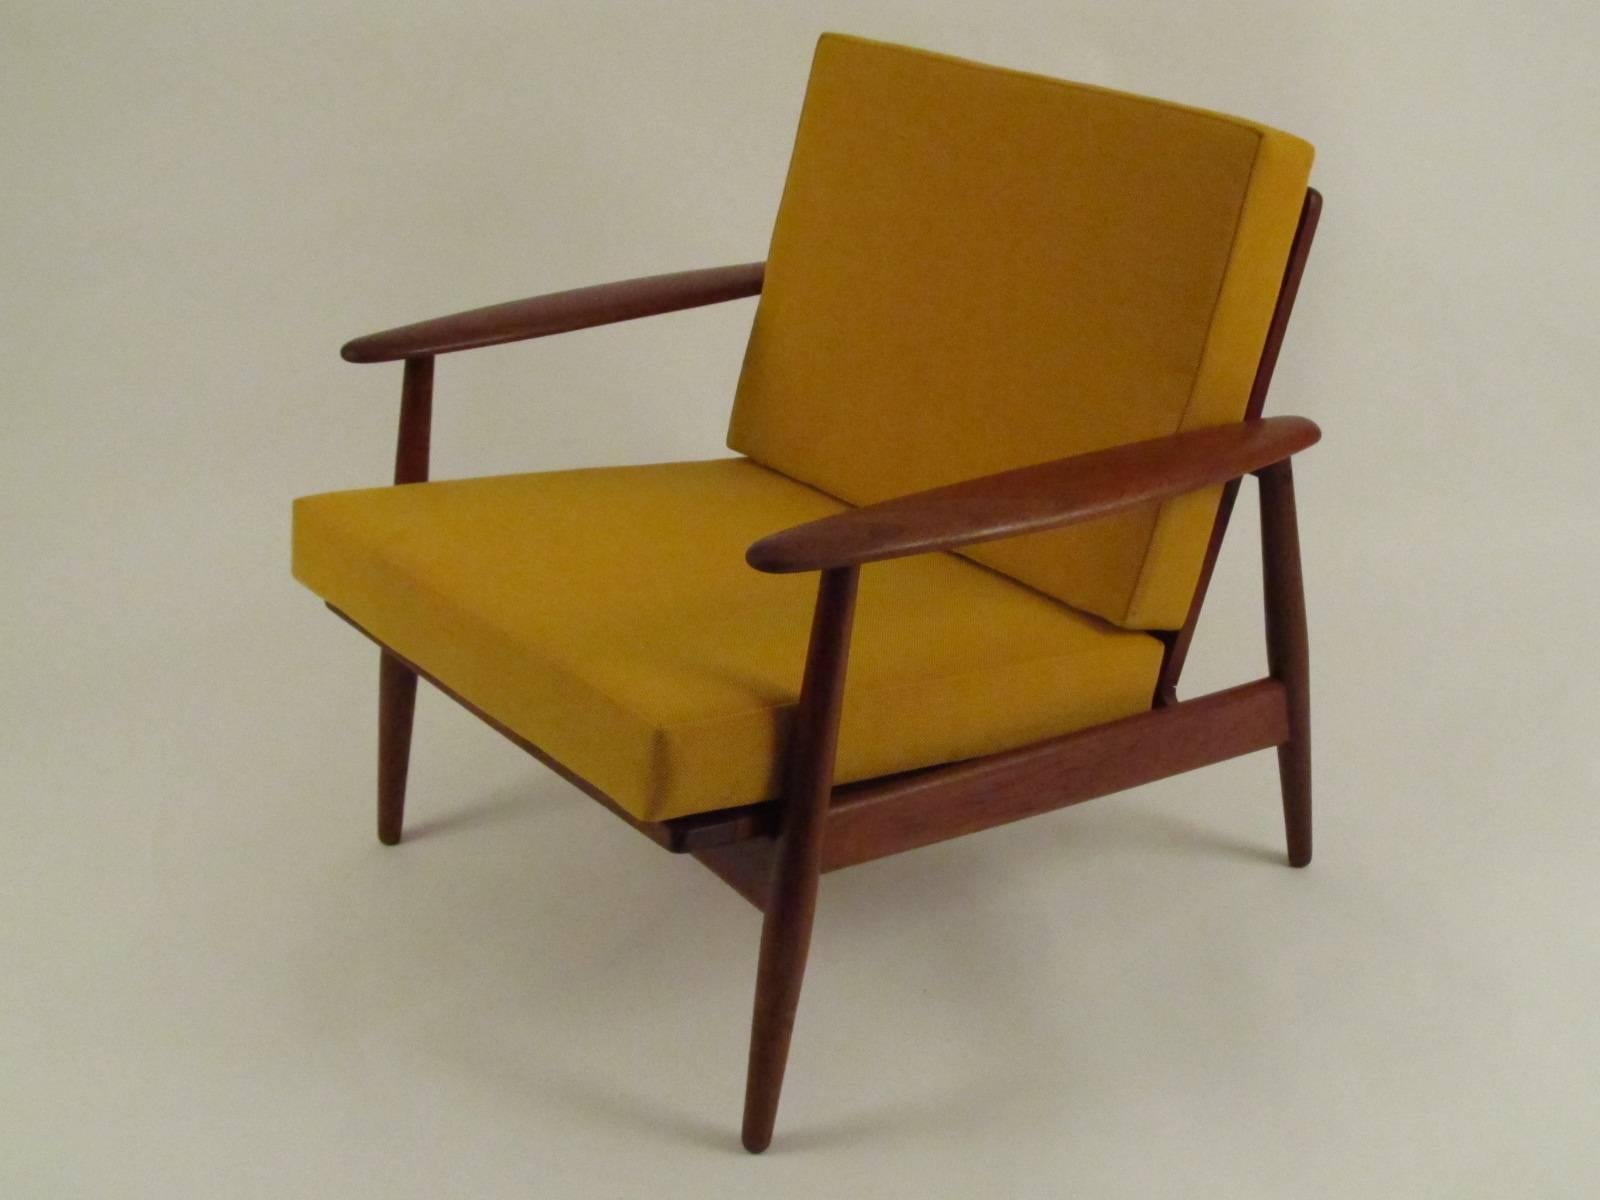 A lovely Danish teak armchair attributed to the Moreddi furniture company. The 